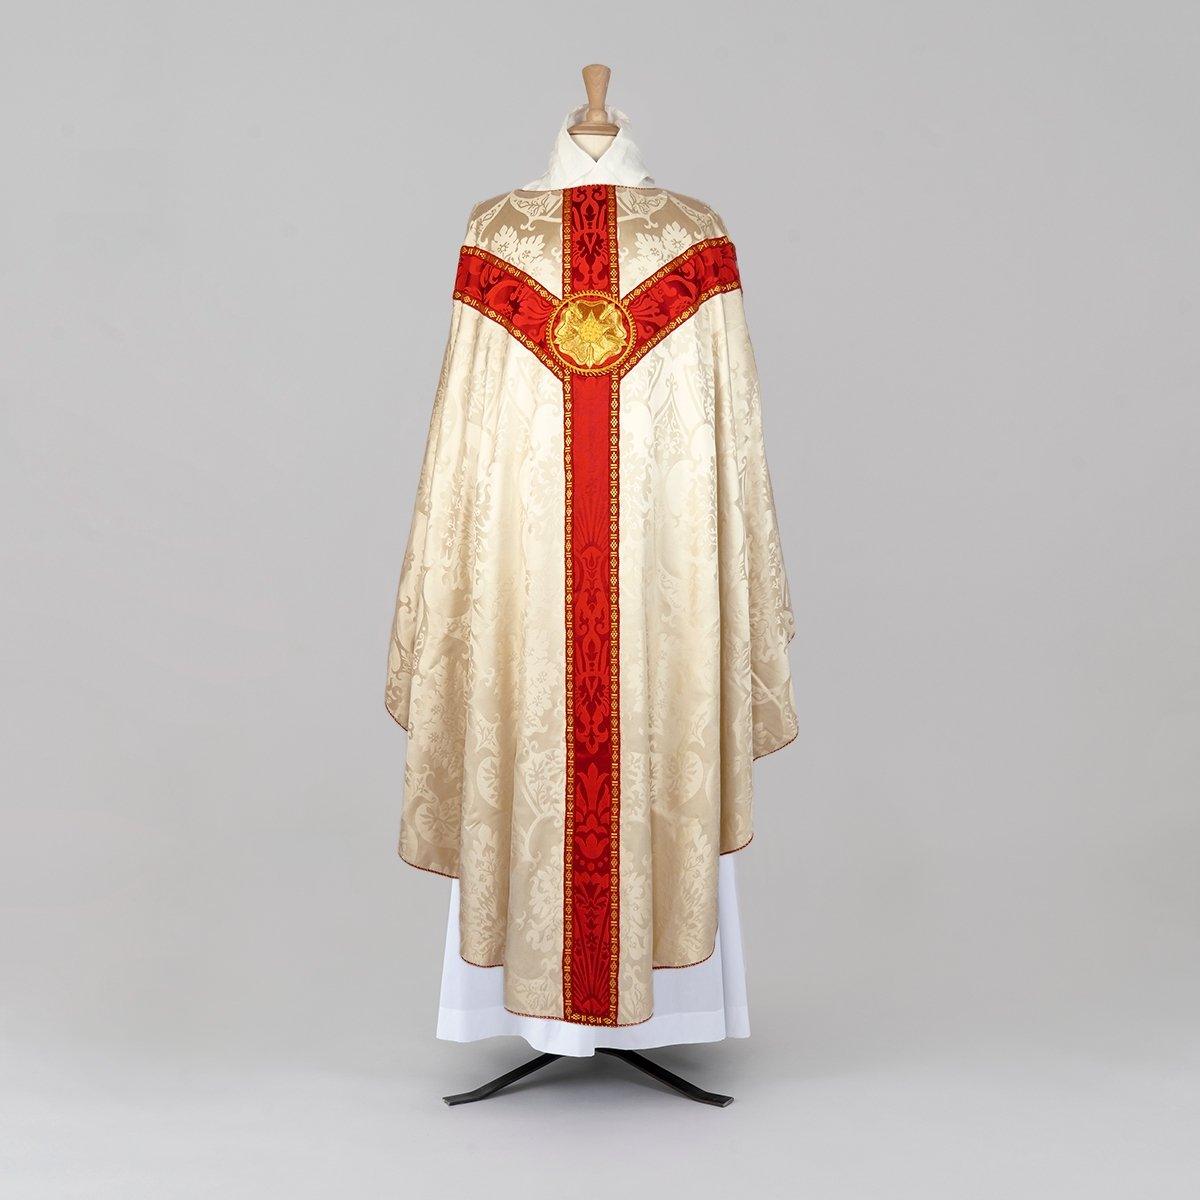 Full Gothic Chasuble in Cream 'Gothic' with Red 'St Nicolas' Orphreys - Watts & Co.